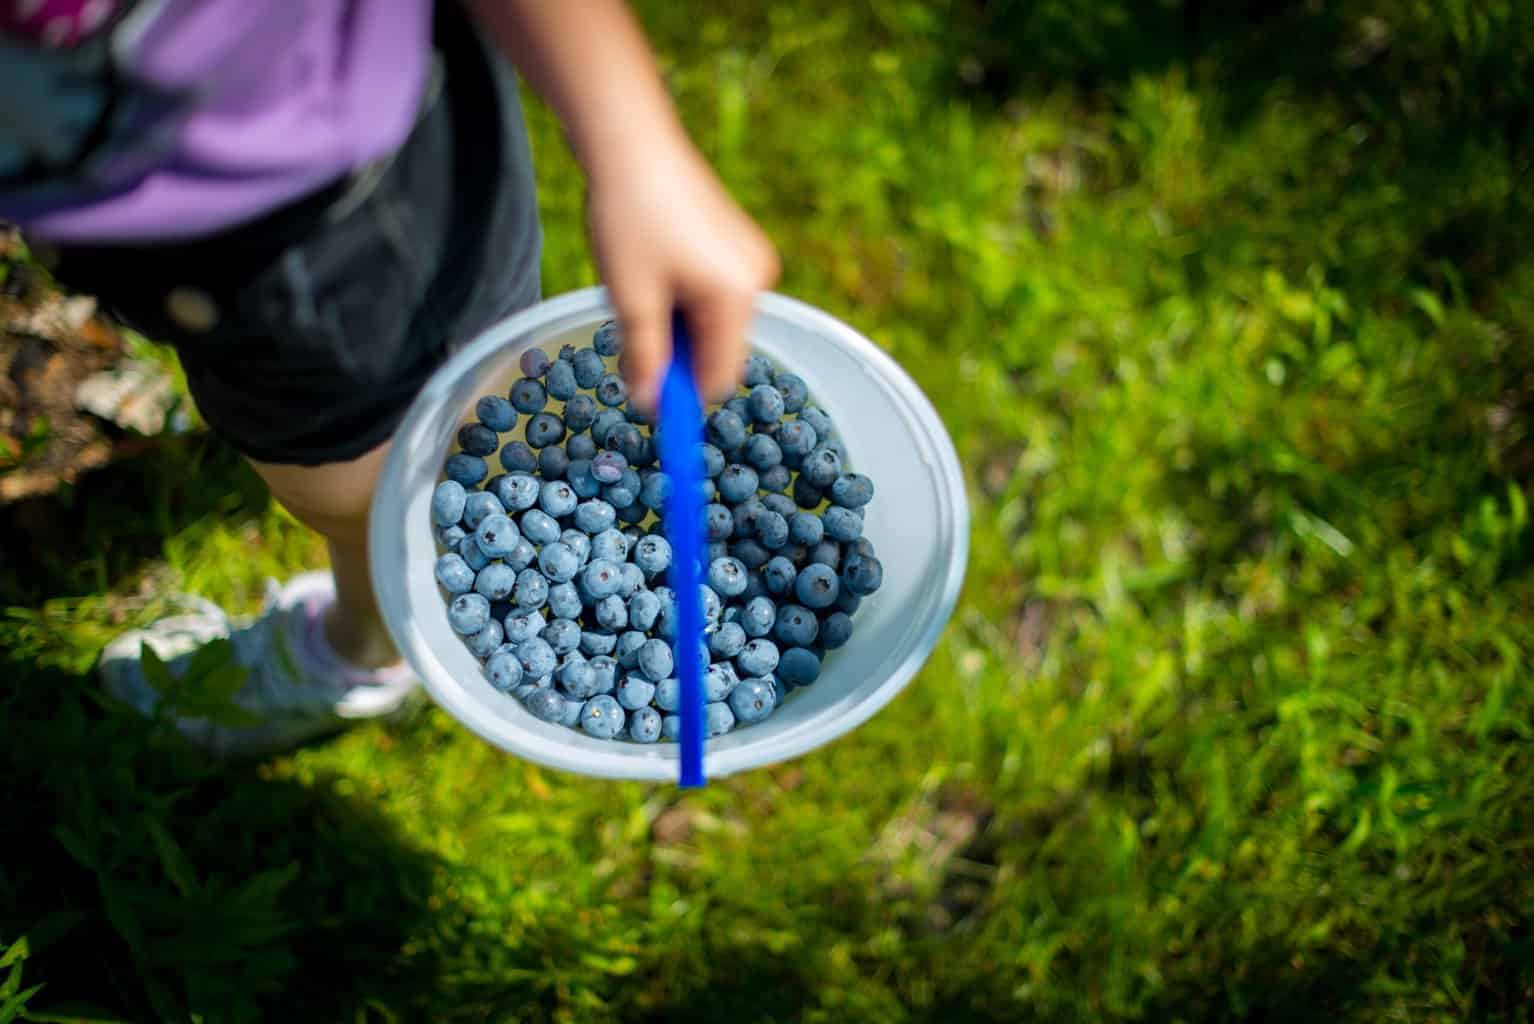 Sungiven Foods blueberry picking